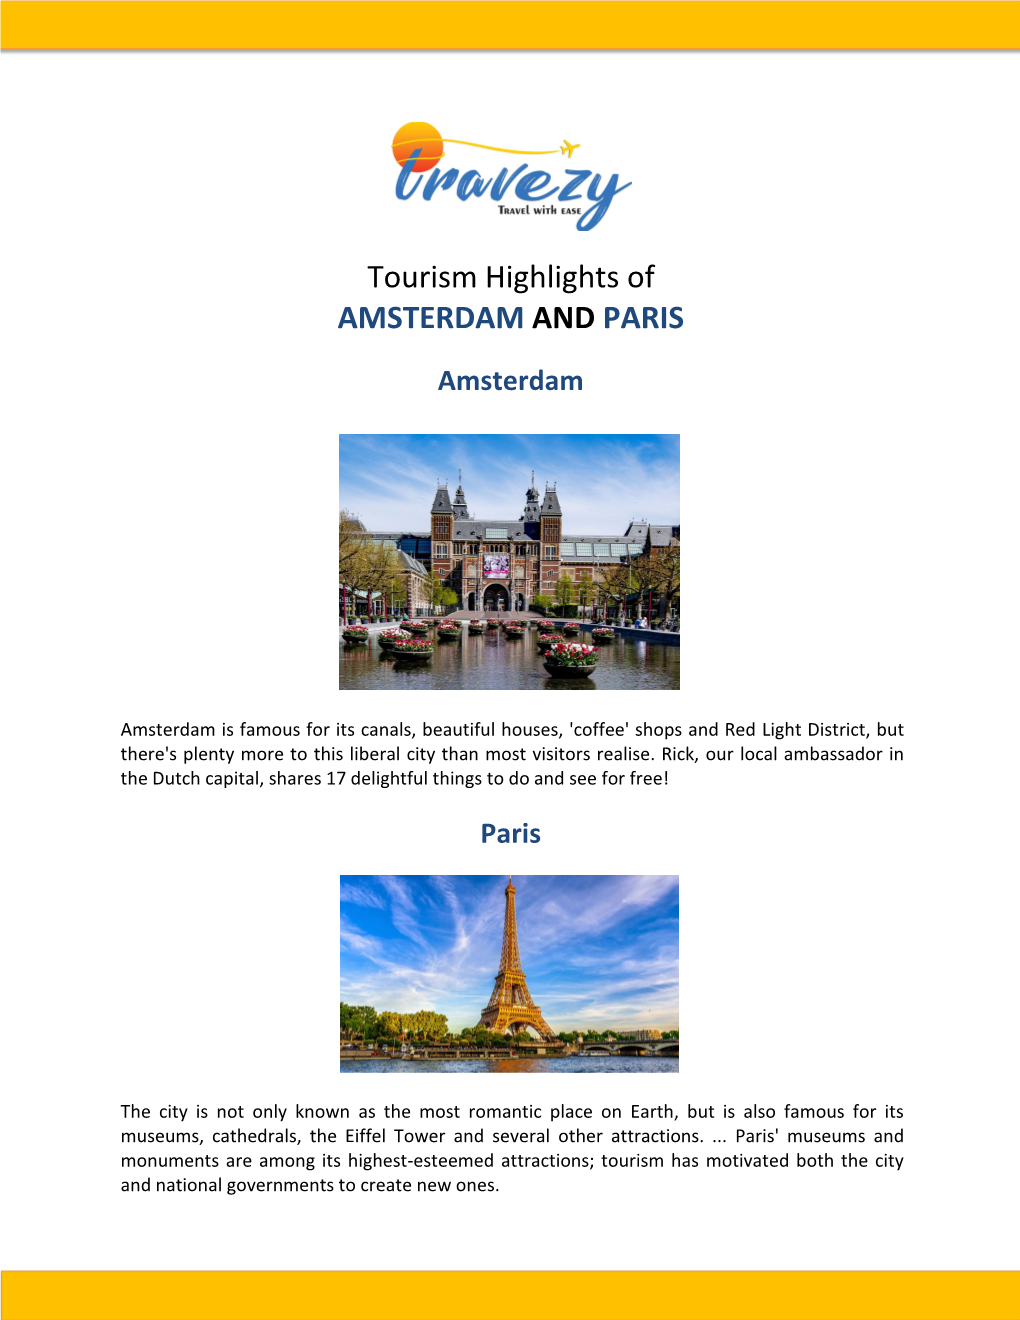 Tourism Highlights of AMSTERDAM and PARIS